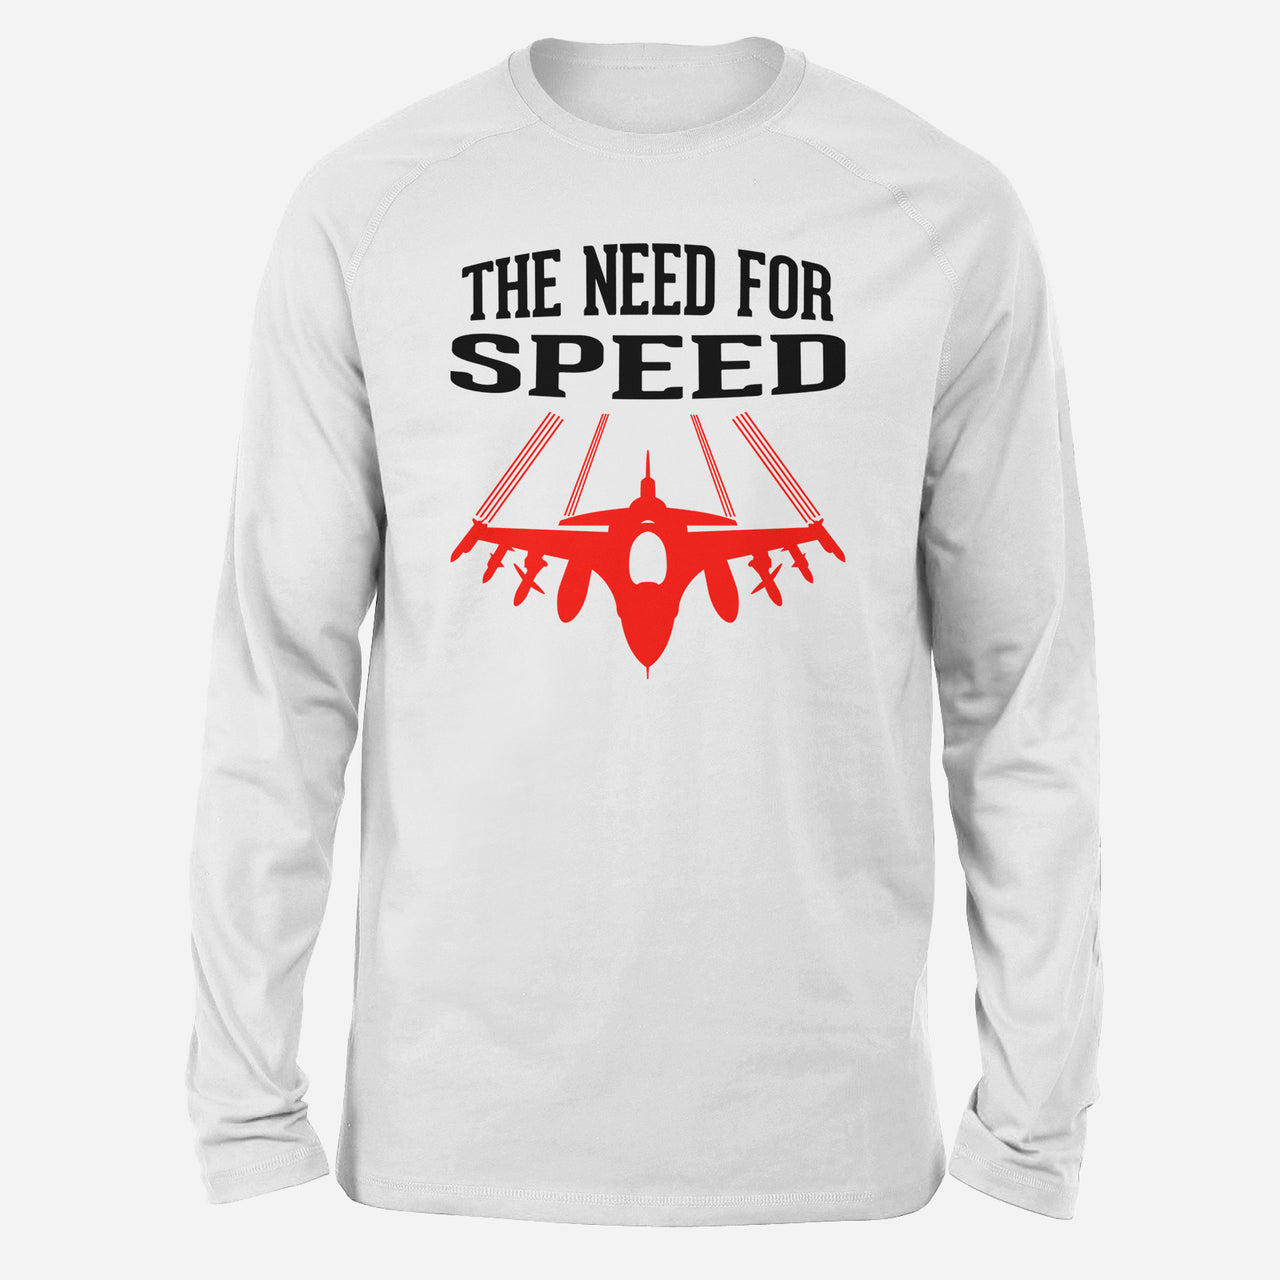 The Need For Speed Designed Long-Sleeve T-Shirts